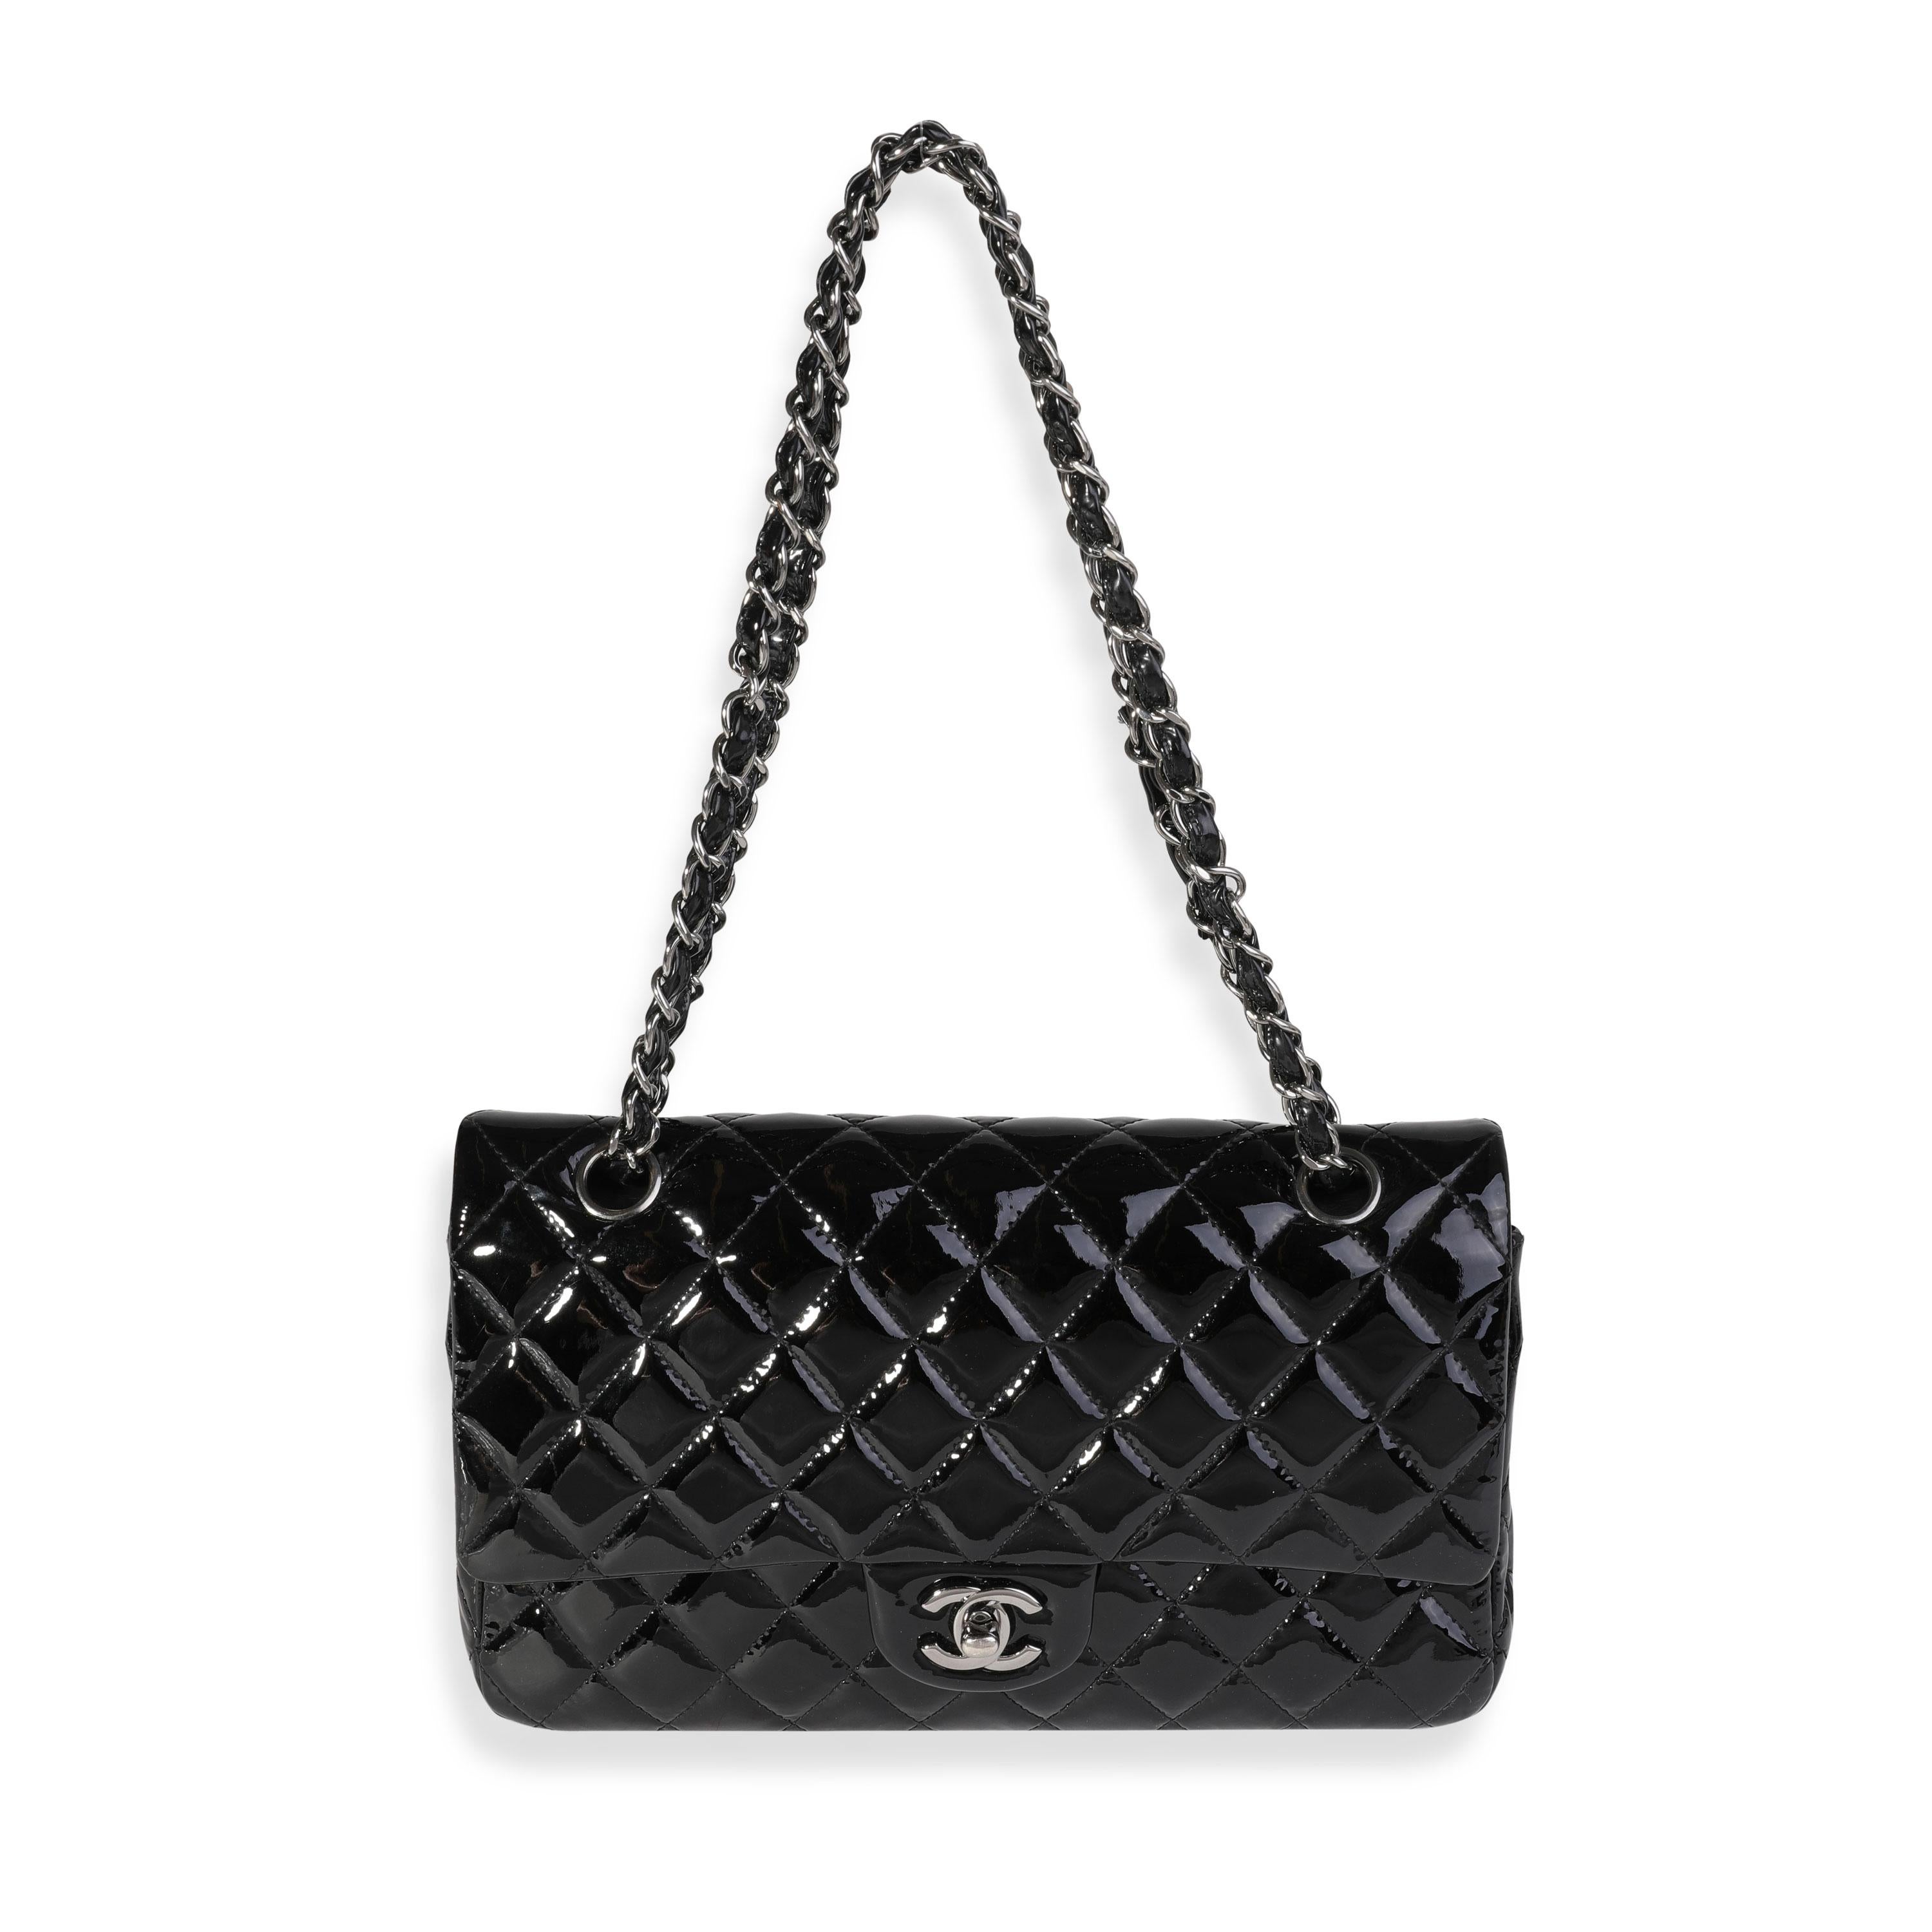 Listing Title: Chanel Black Quilted Patent Leather Medium Classic Double Flap Bag
SKU: 121324
MSRP: 8800.00
Condition: Pre-owned 
Handbag Condition: Good
Condition Comments: Good Condition. Light scuffing throughout exterior. Scratching to hardware.